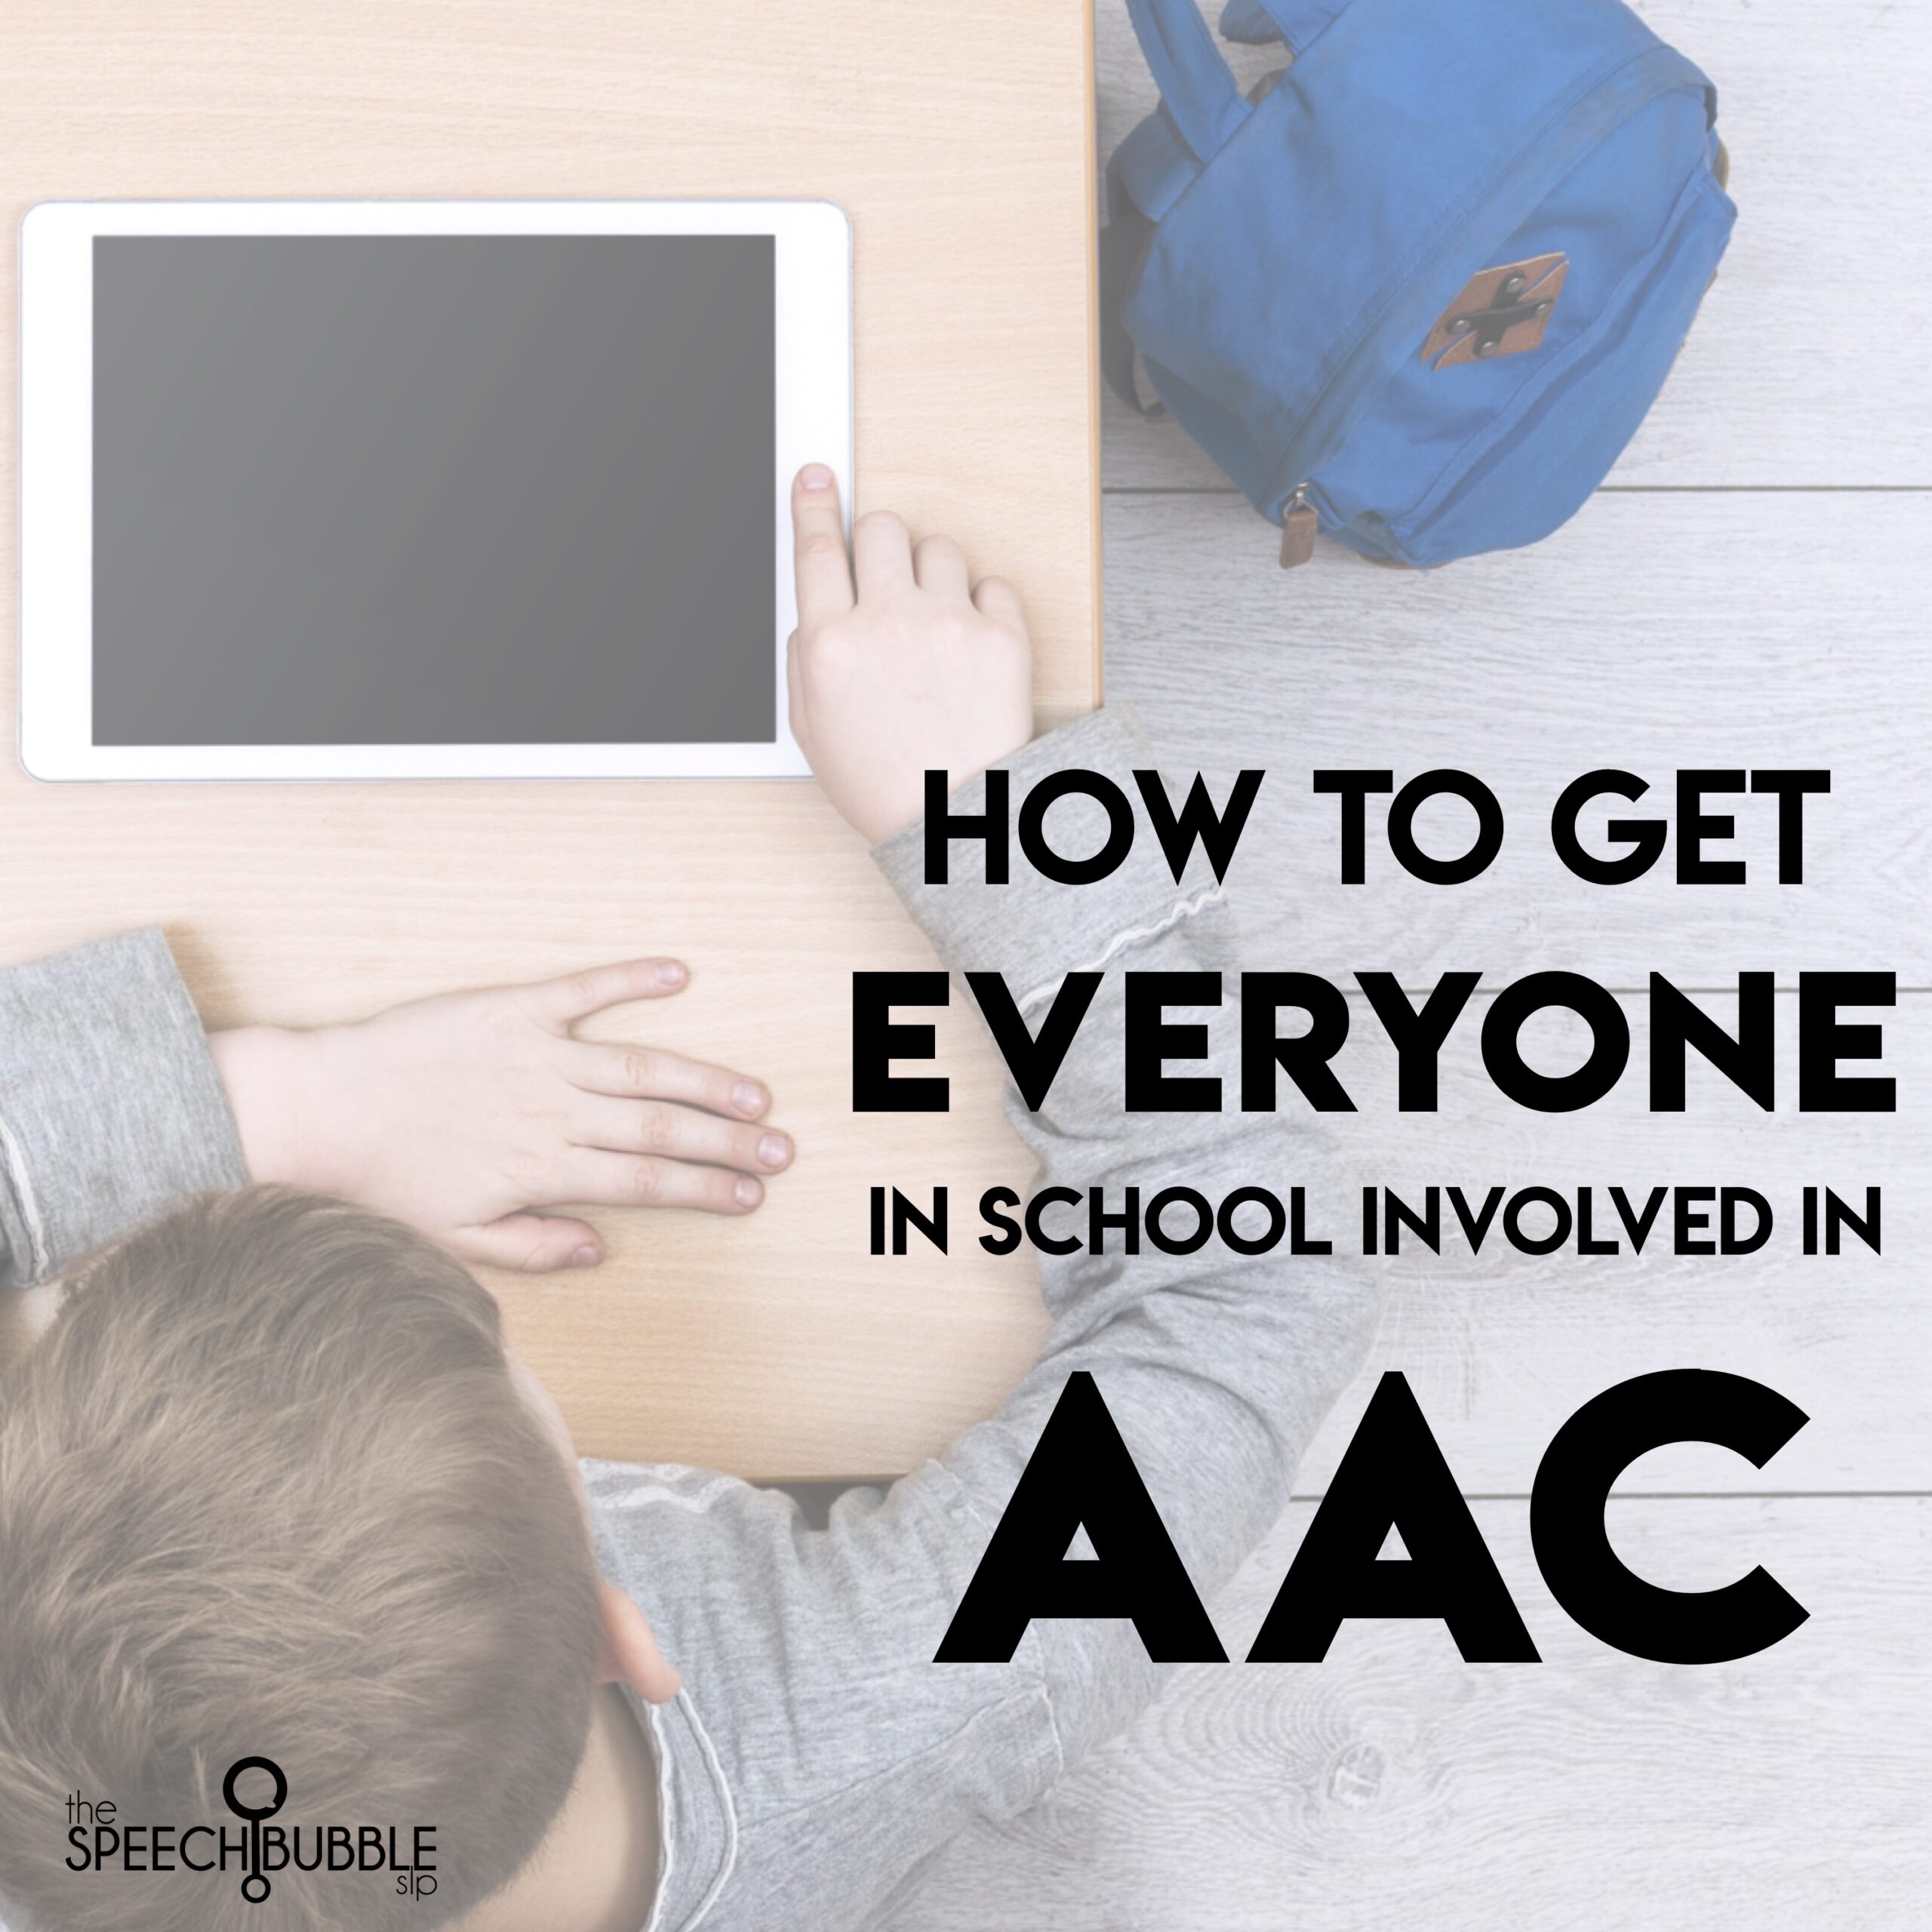 How to get EVERYONE at school involved in AAC